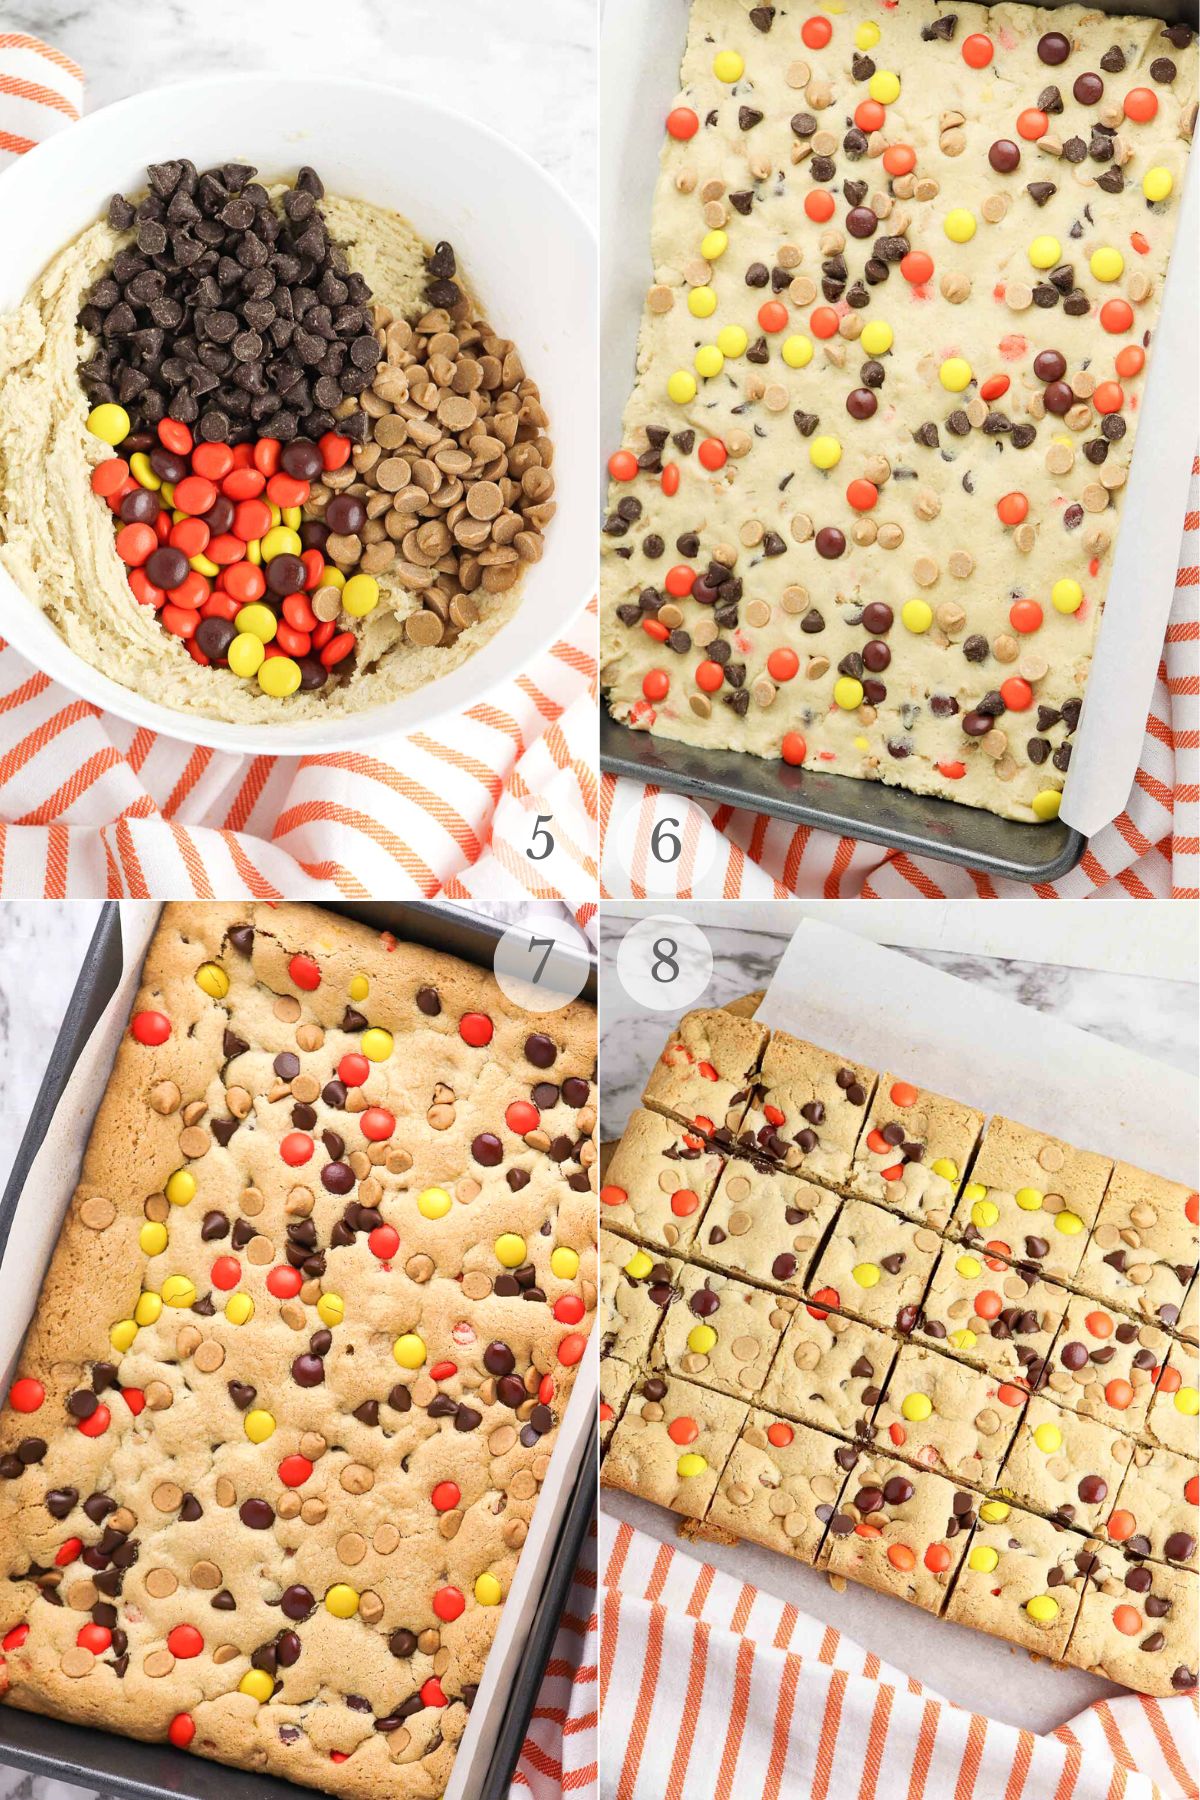 reese's pieces cookie bars recipe steps 5-8.